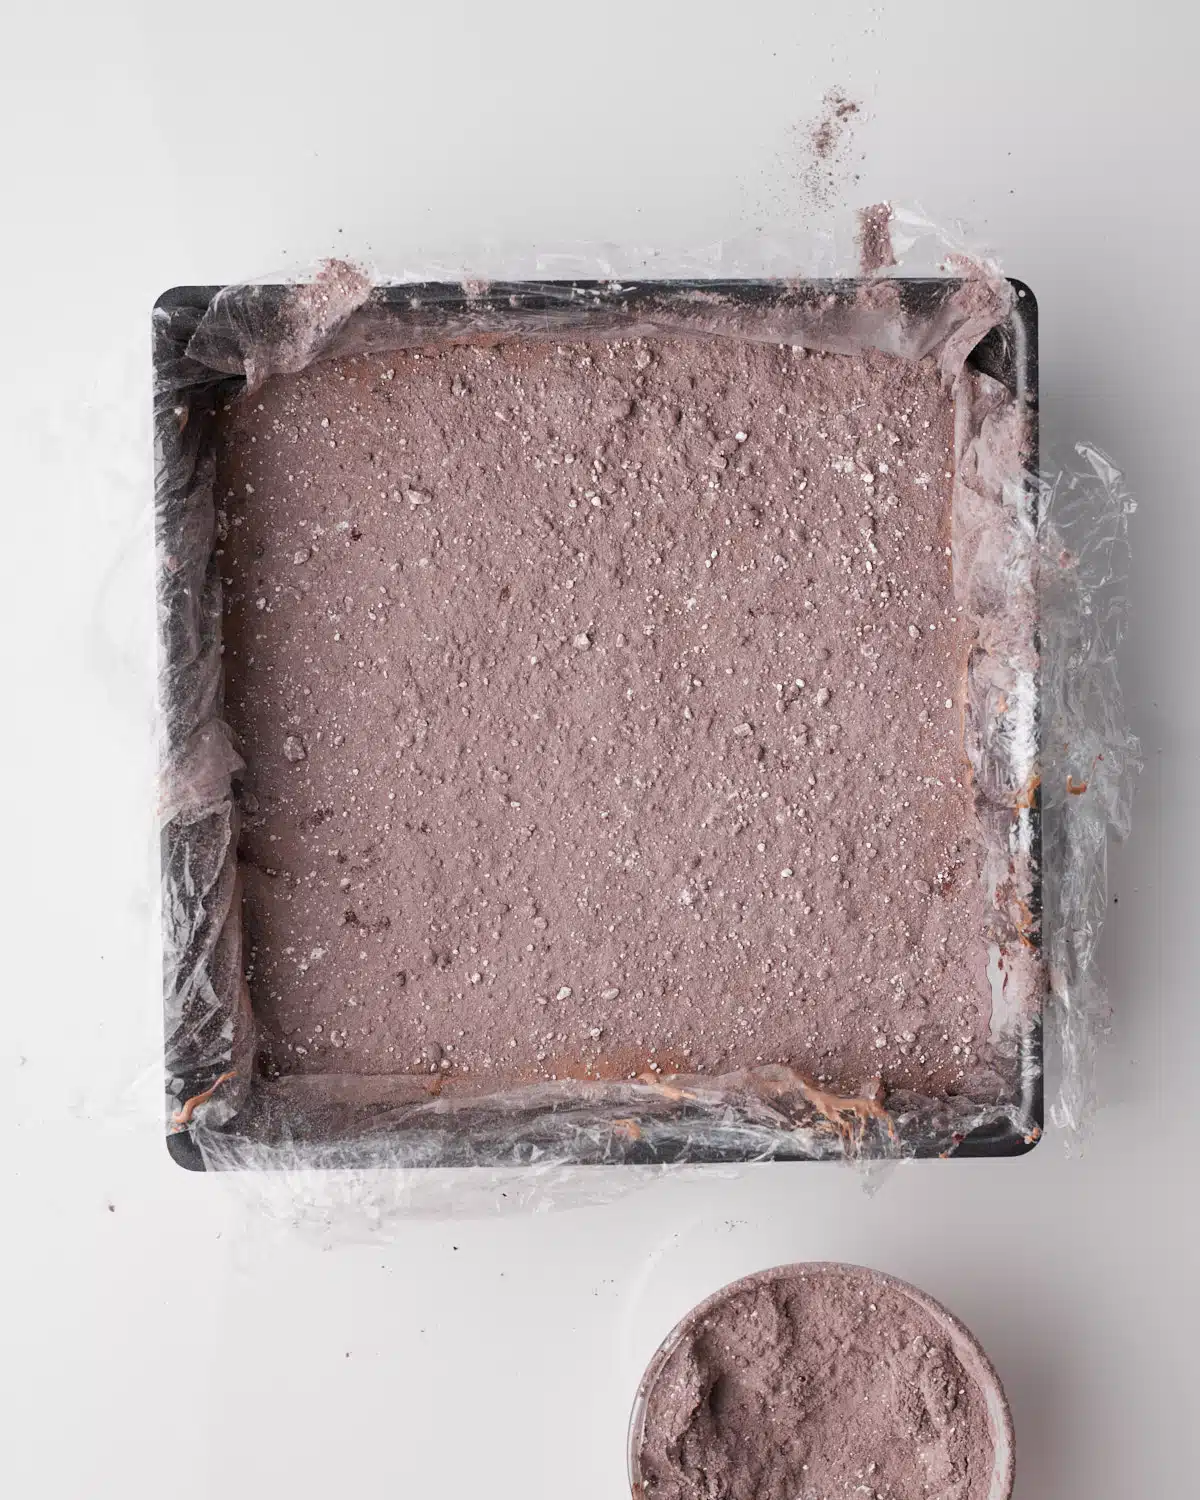 chocolate marshmallow with powdered coating on top. 